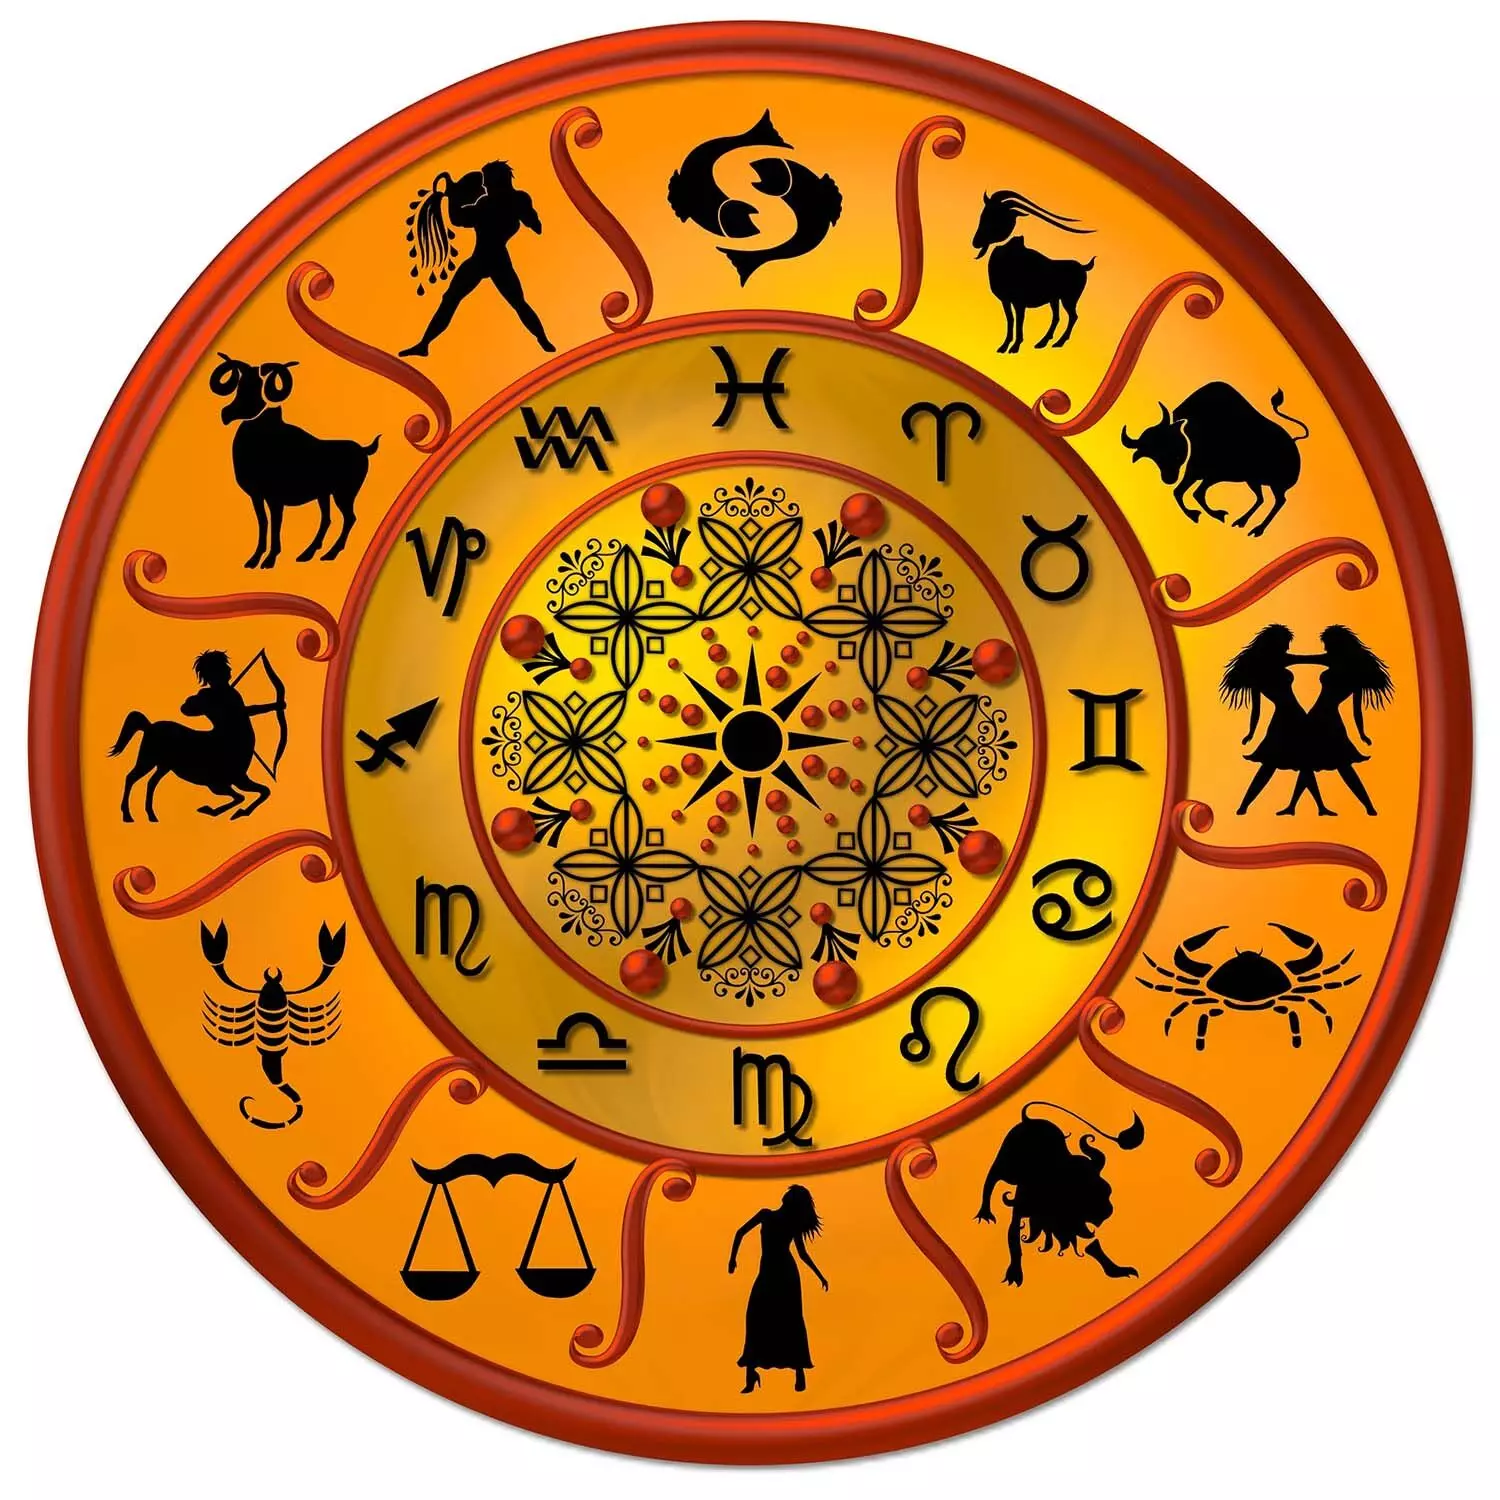 28 July – Know your todays horoscope